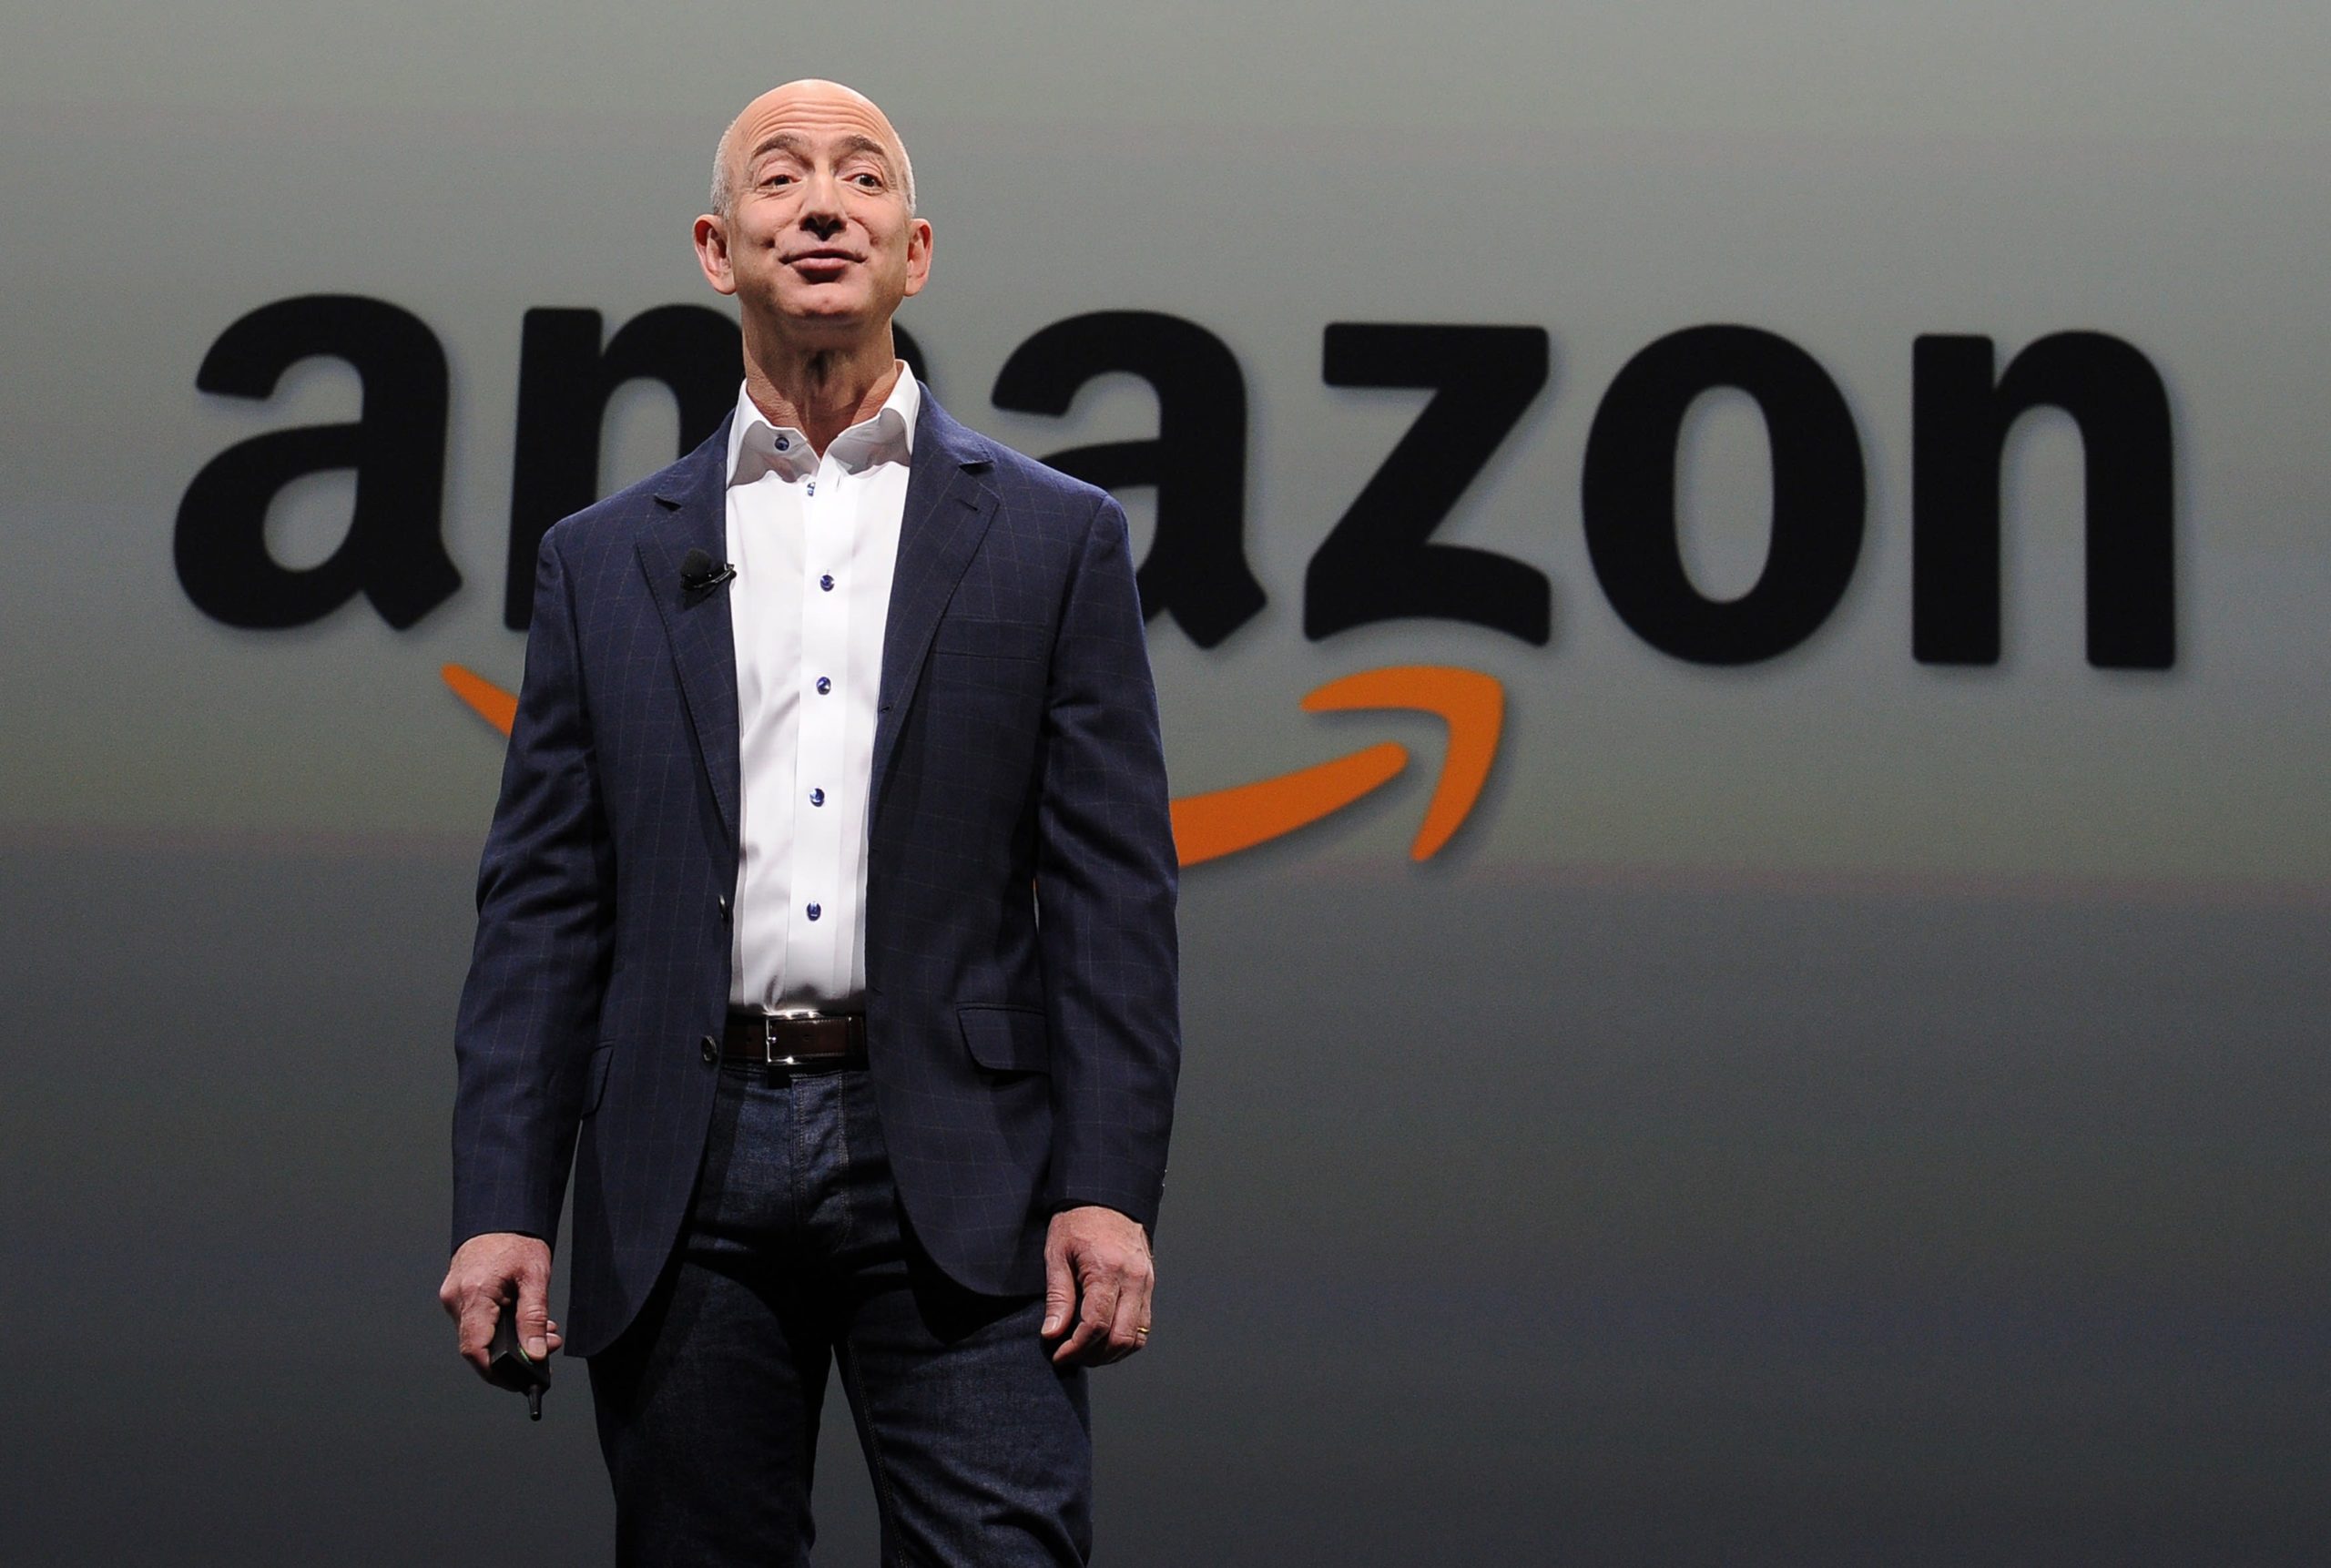 Wall Road sees Amazon rejoining the trillion-dollar membership later this yr